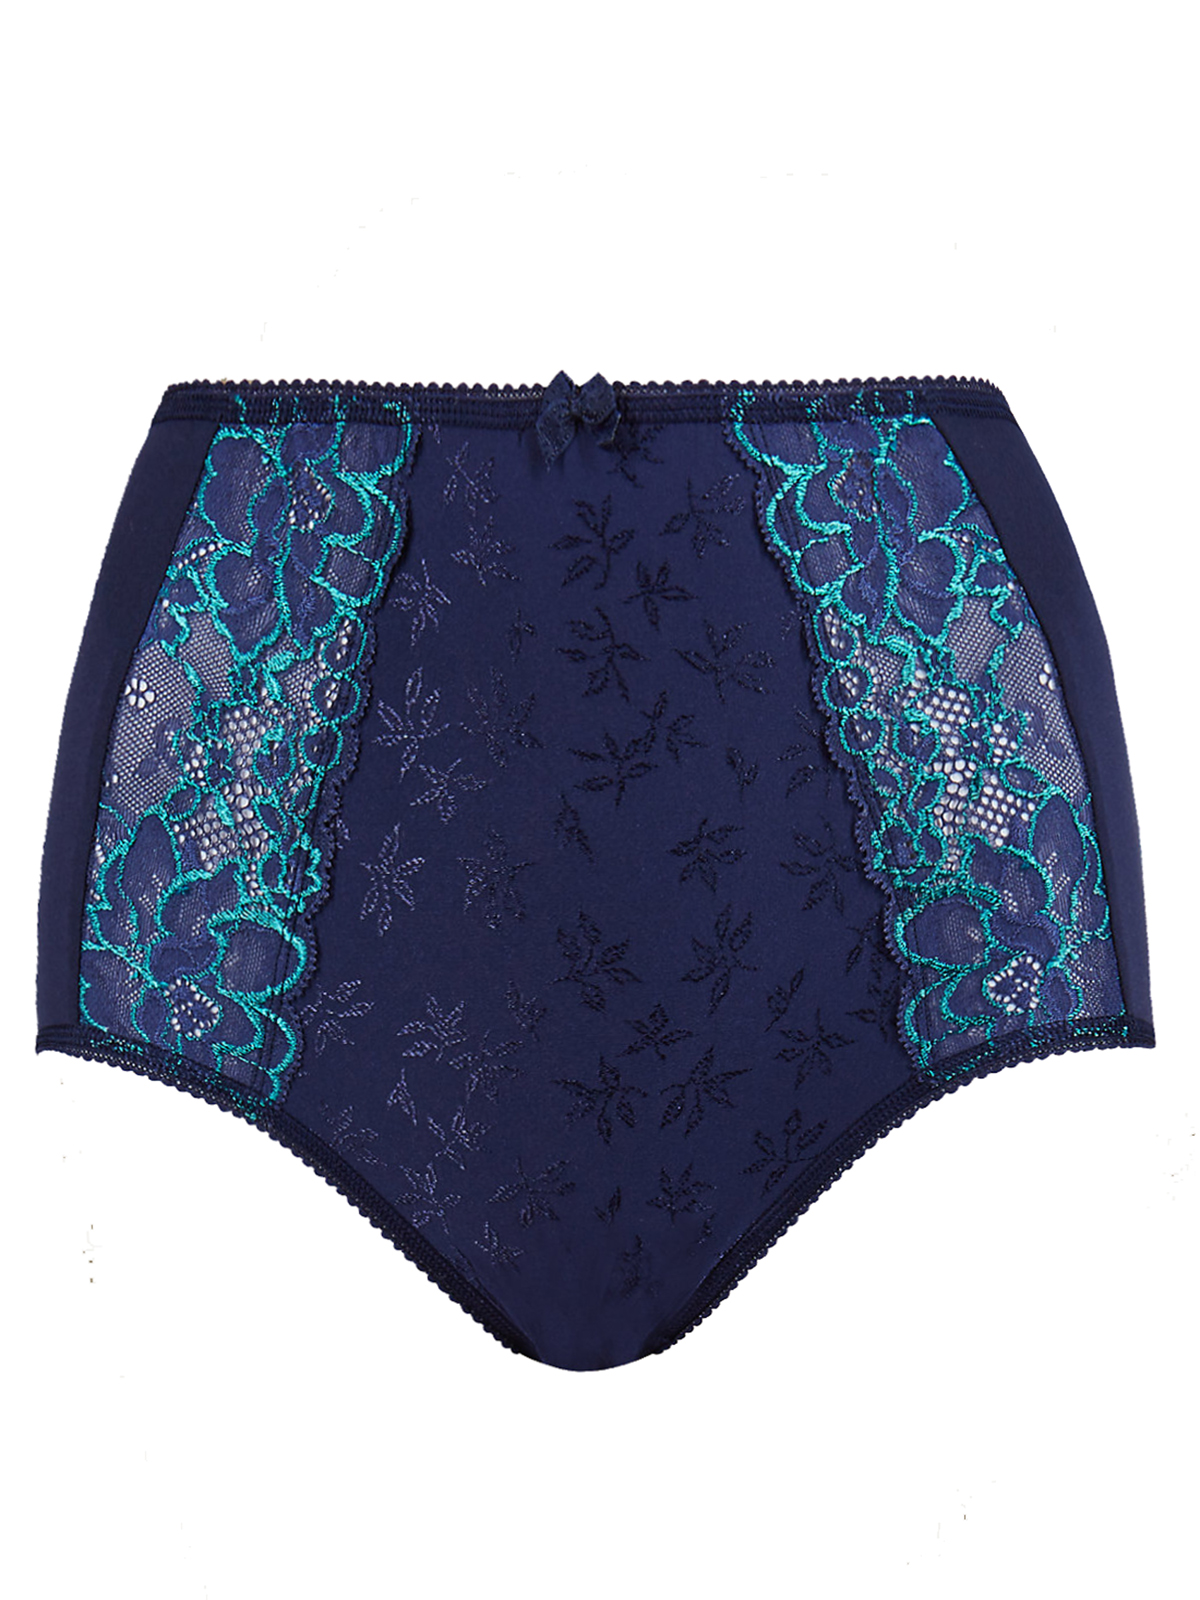 Brand New Ex M&S Jacquard Lace High Rise Full Briefs Sizes 10-28 Blue/Green 